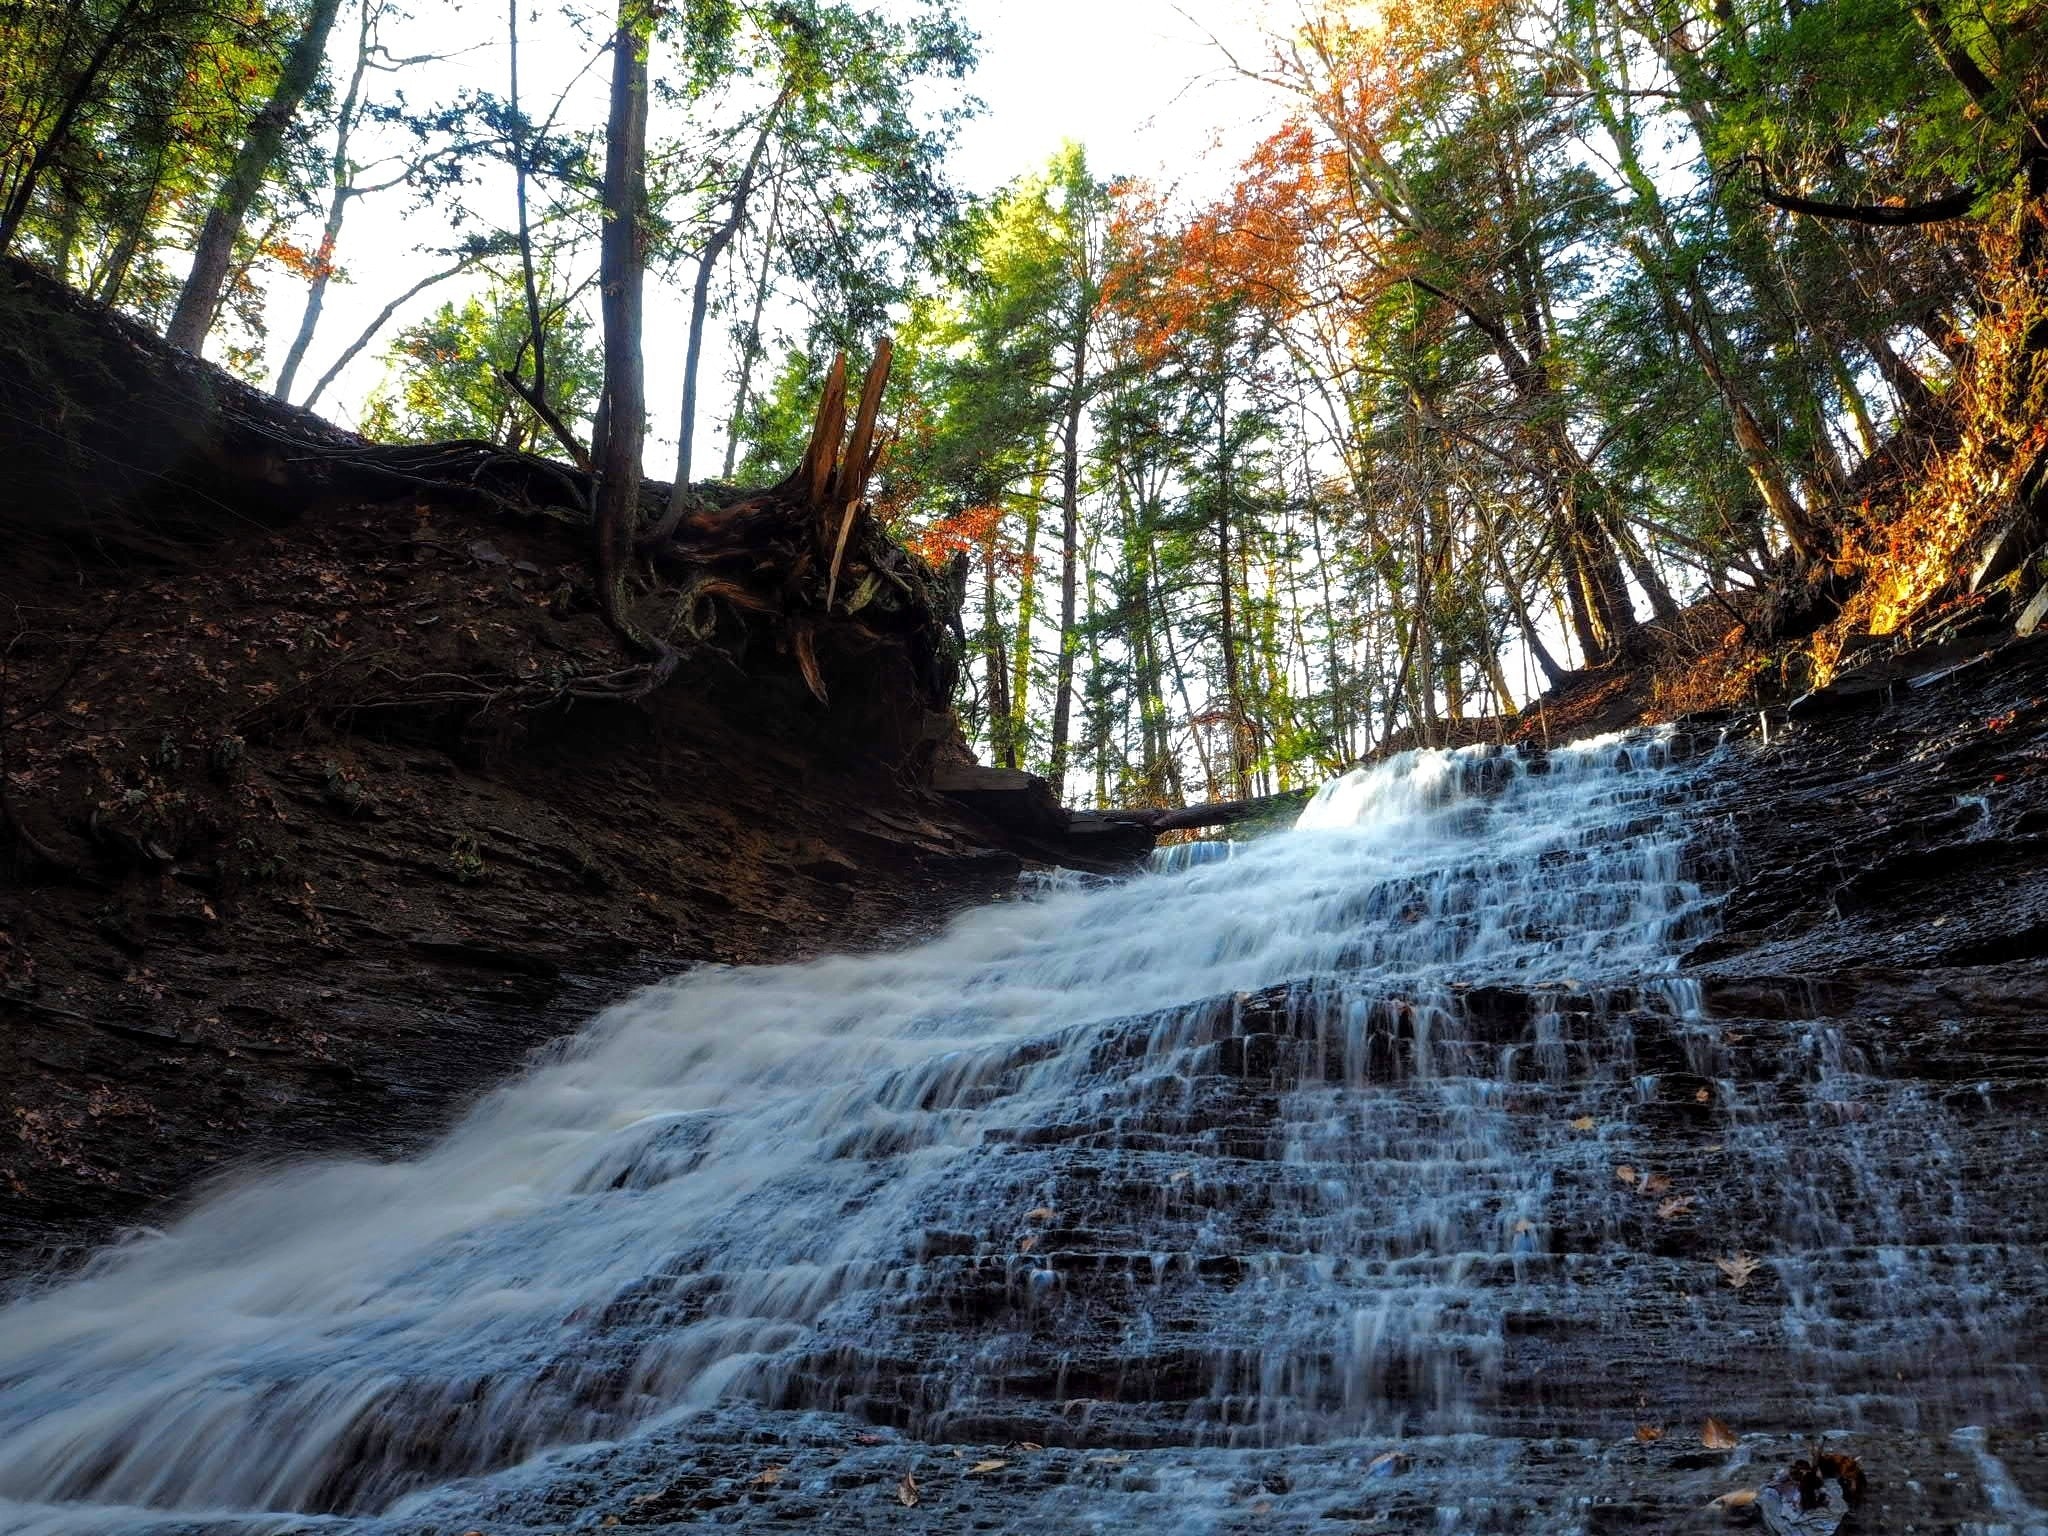 Keep on hiking past Blue Hen Falls, zig zag the creek a few times and you'll arrive at Buttermilk Falls.